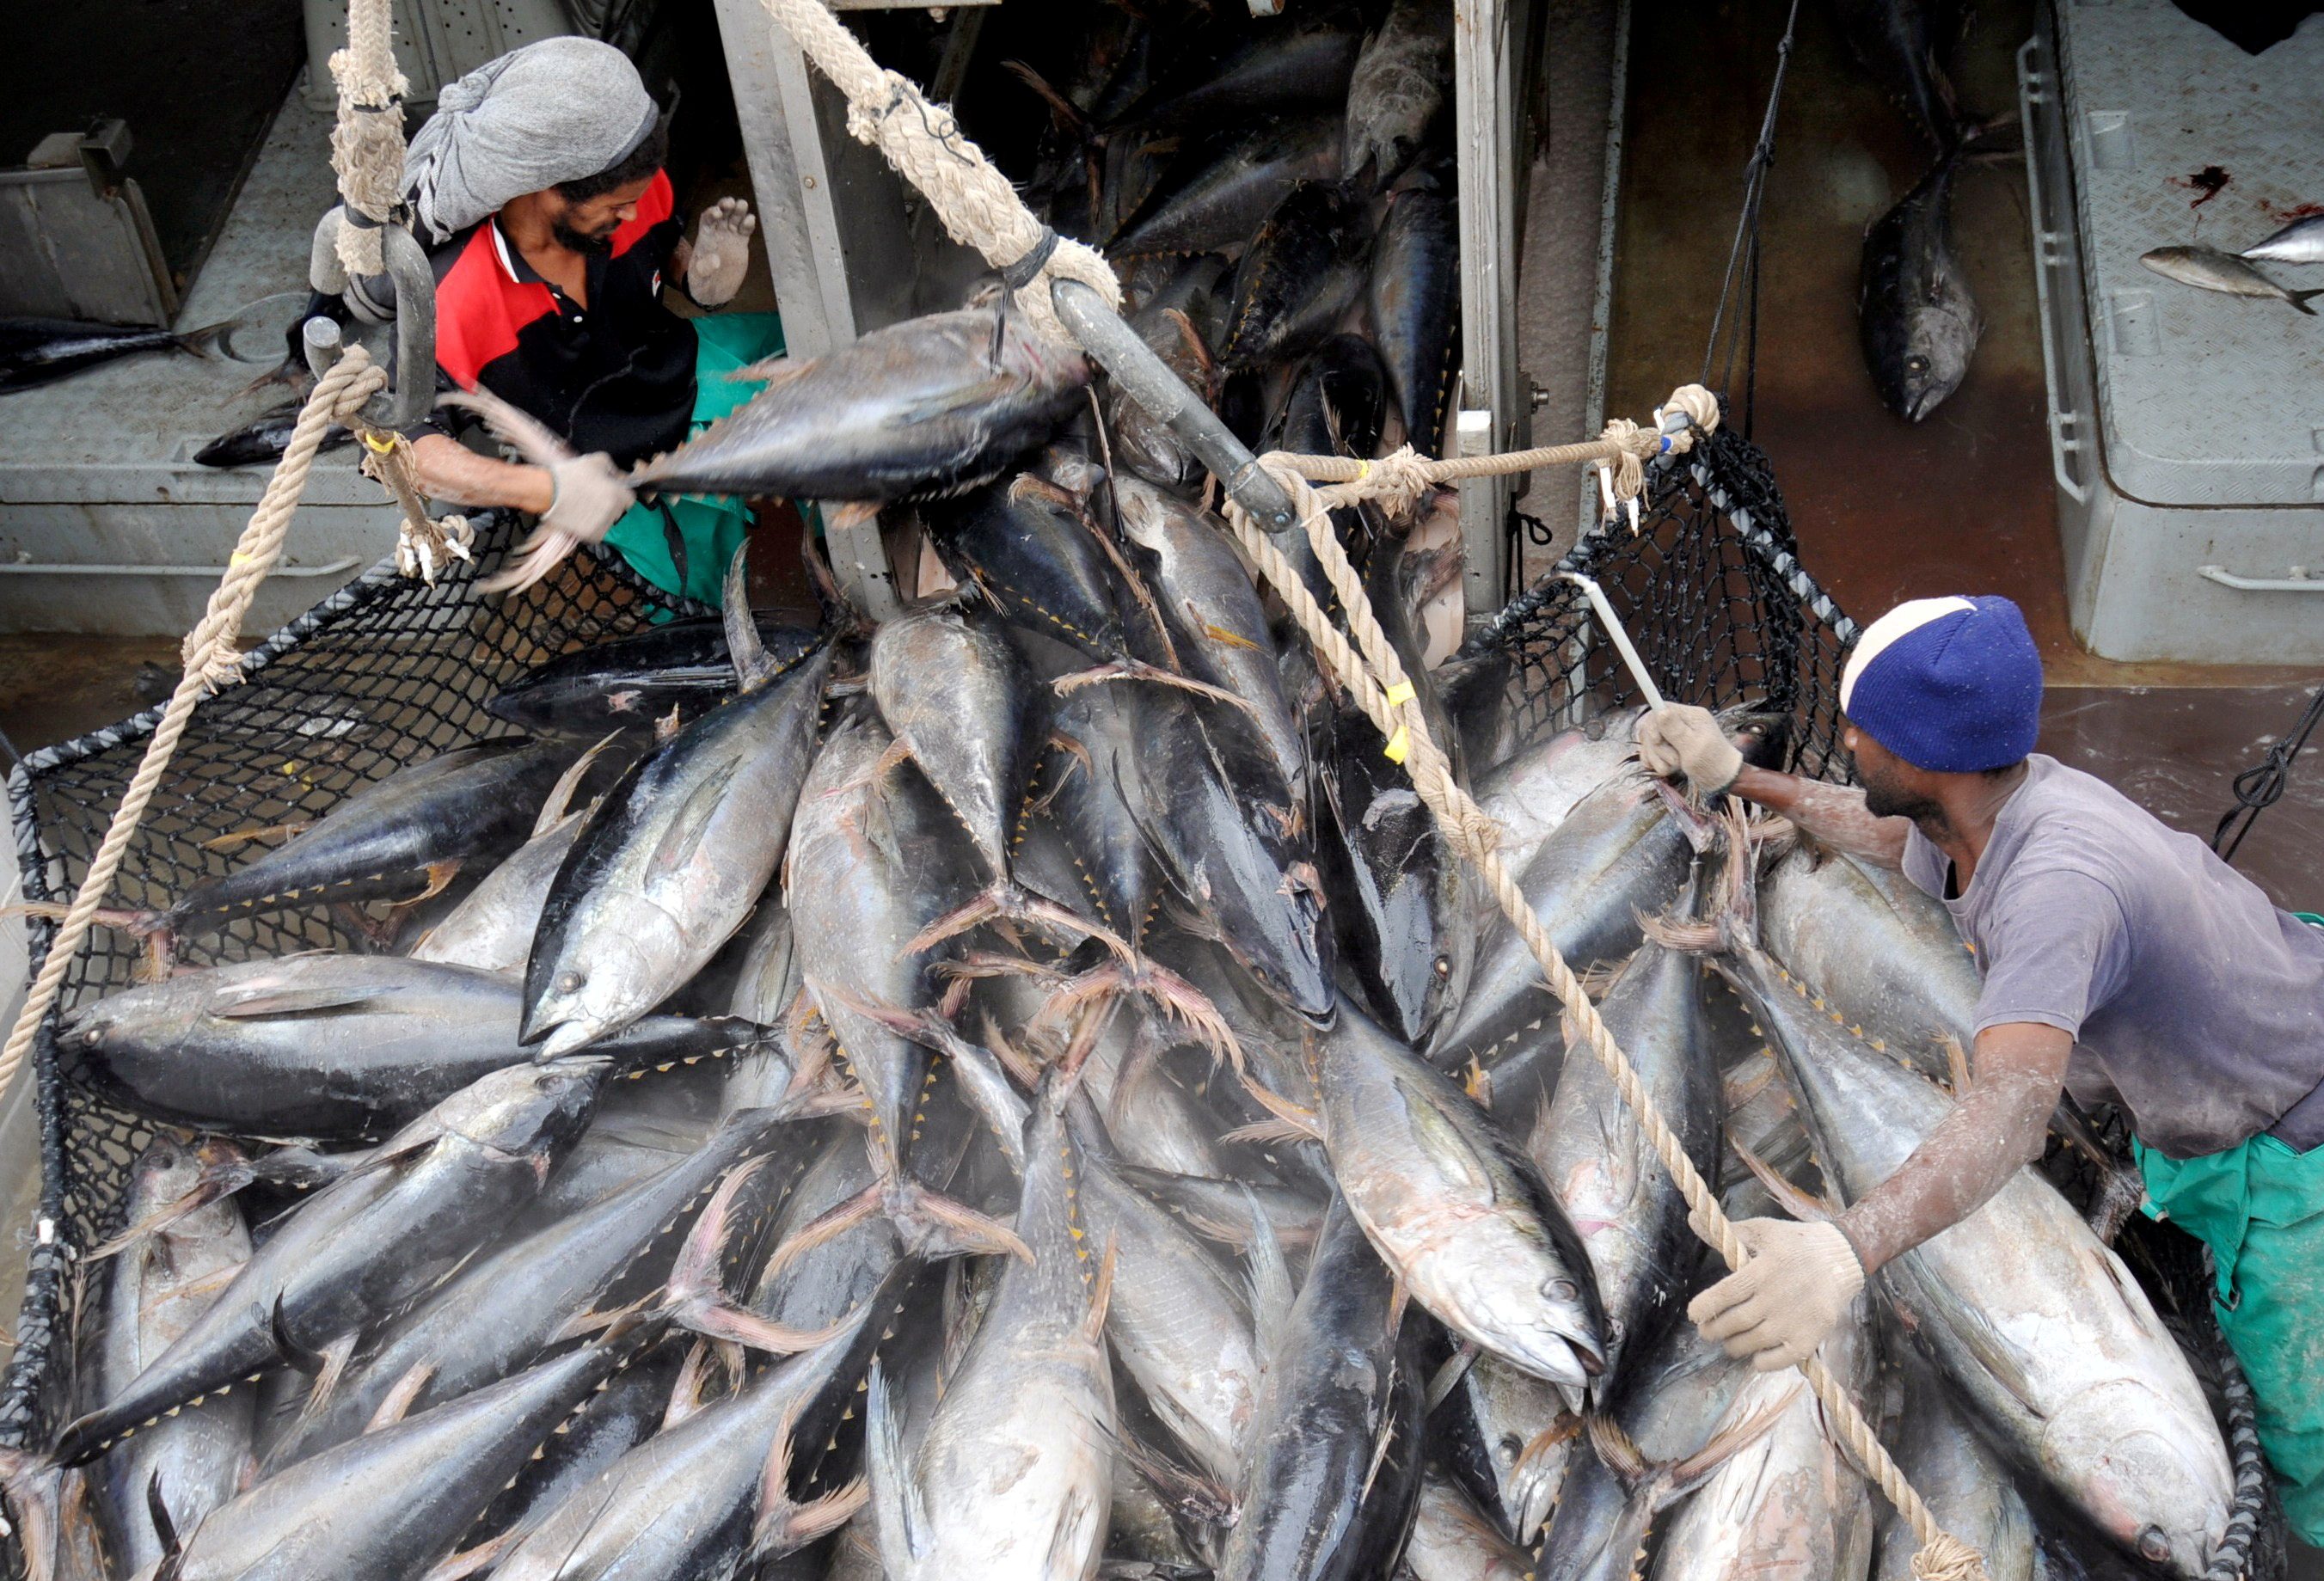 EXPLAINER: What’s at stake in WTO talks on fishing rules?